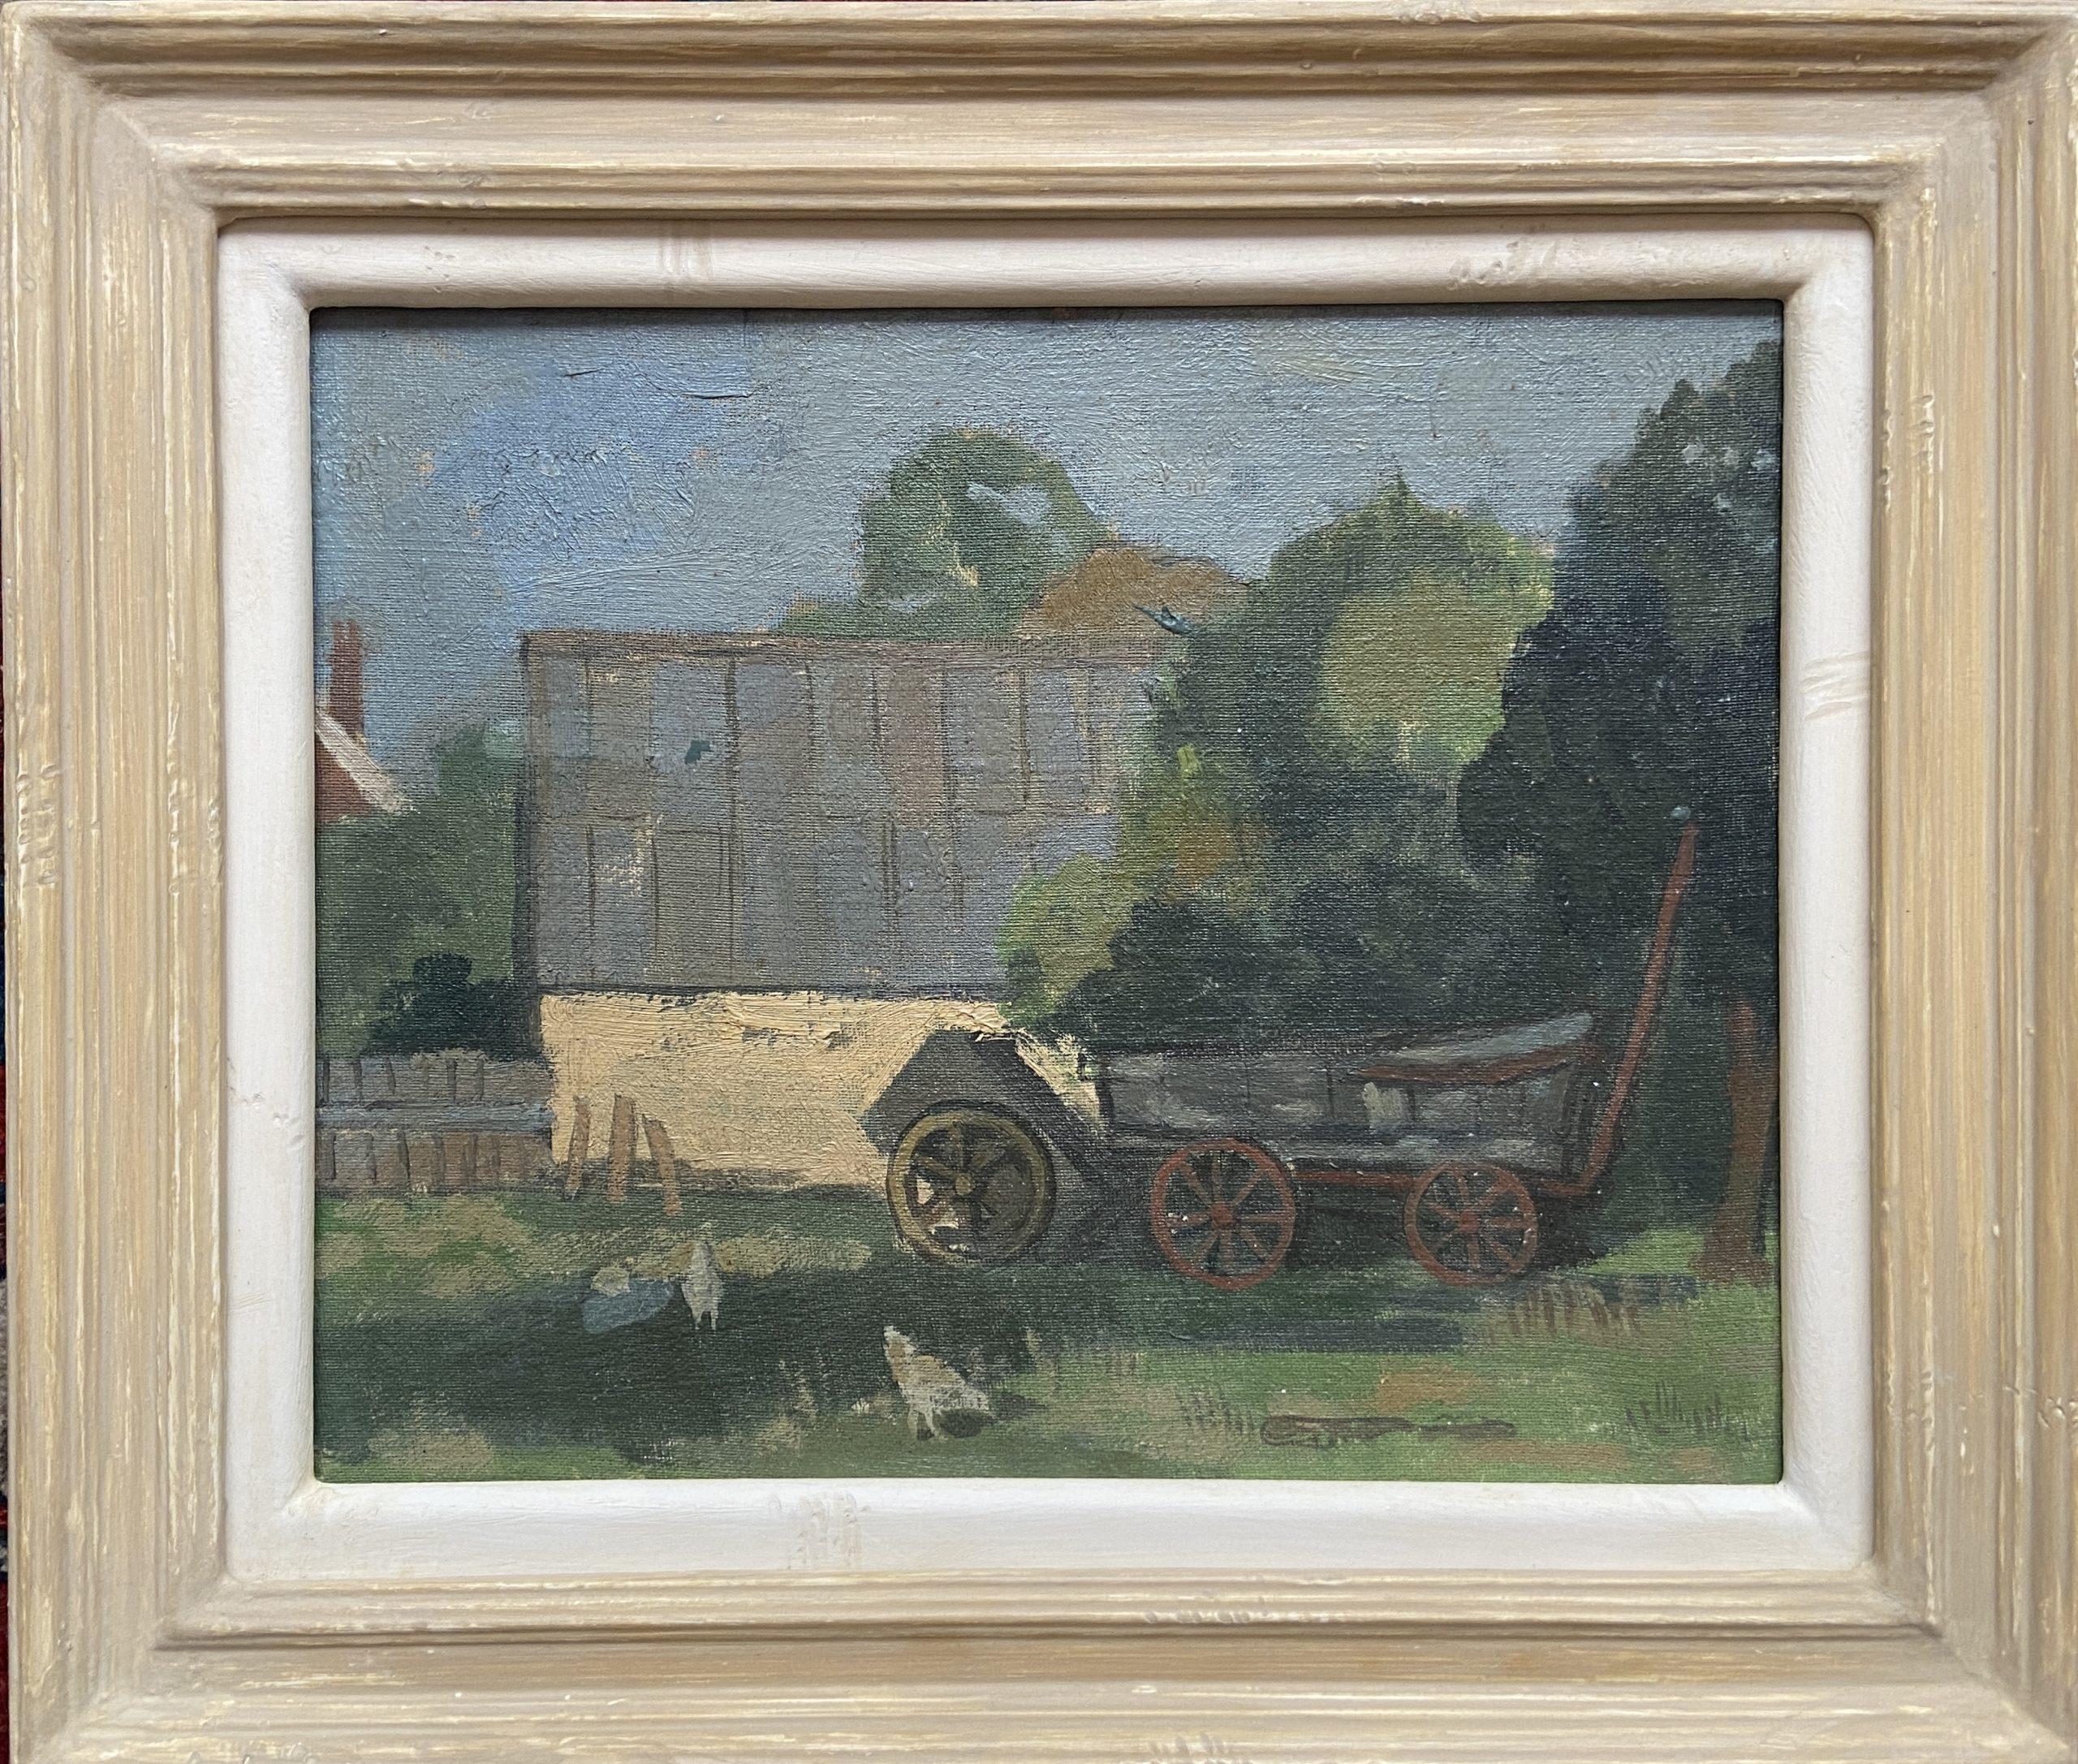 Oil on canvas on board
Image size: 7 1/2 x 5 1/2 inches (19 x 14 cm)
Hand made contemporary style frame

This small-scale artwork depicts a working farmstead, in New Zealand. It is a textural work with lots of movement and life. Under blue skies